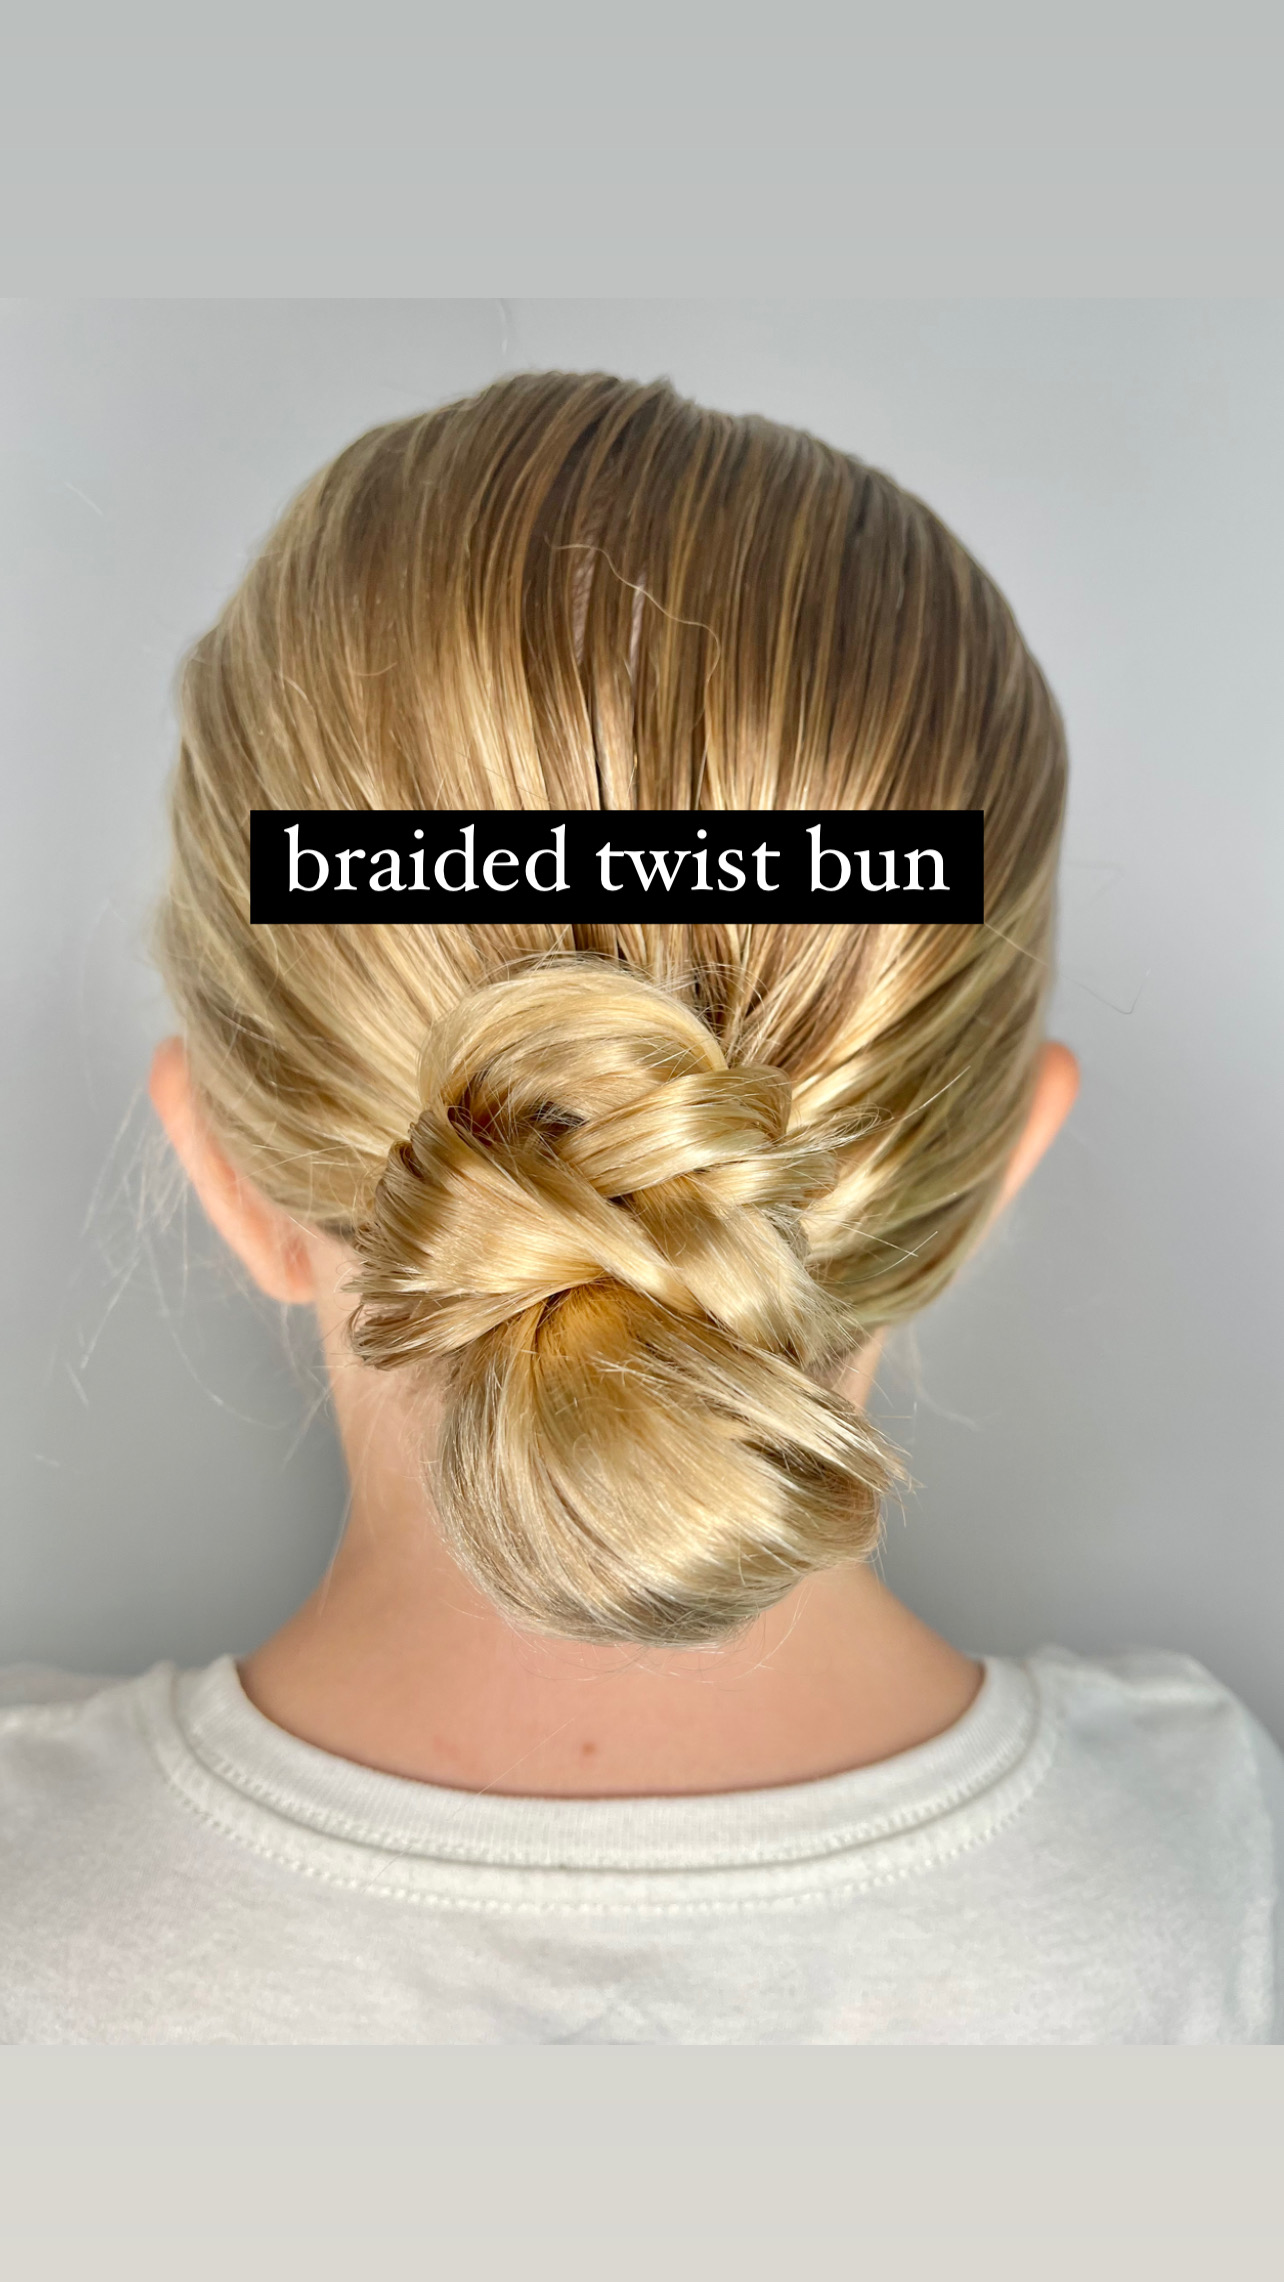 10 Quick Updos for Long Hair - Stylish Life for Moms